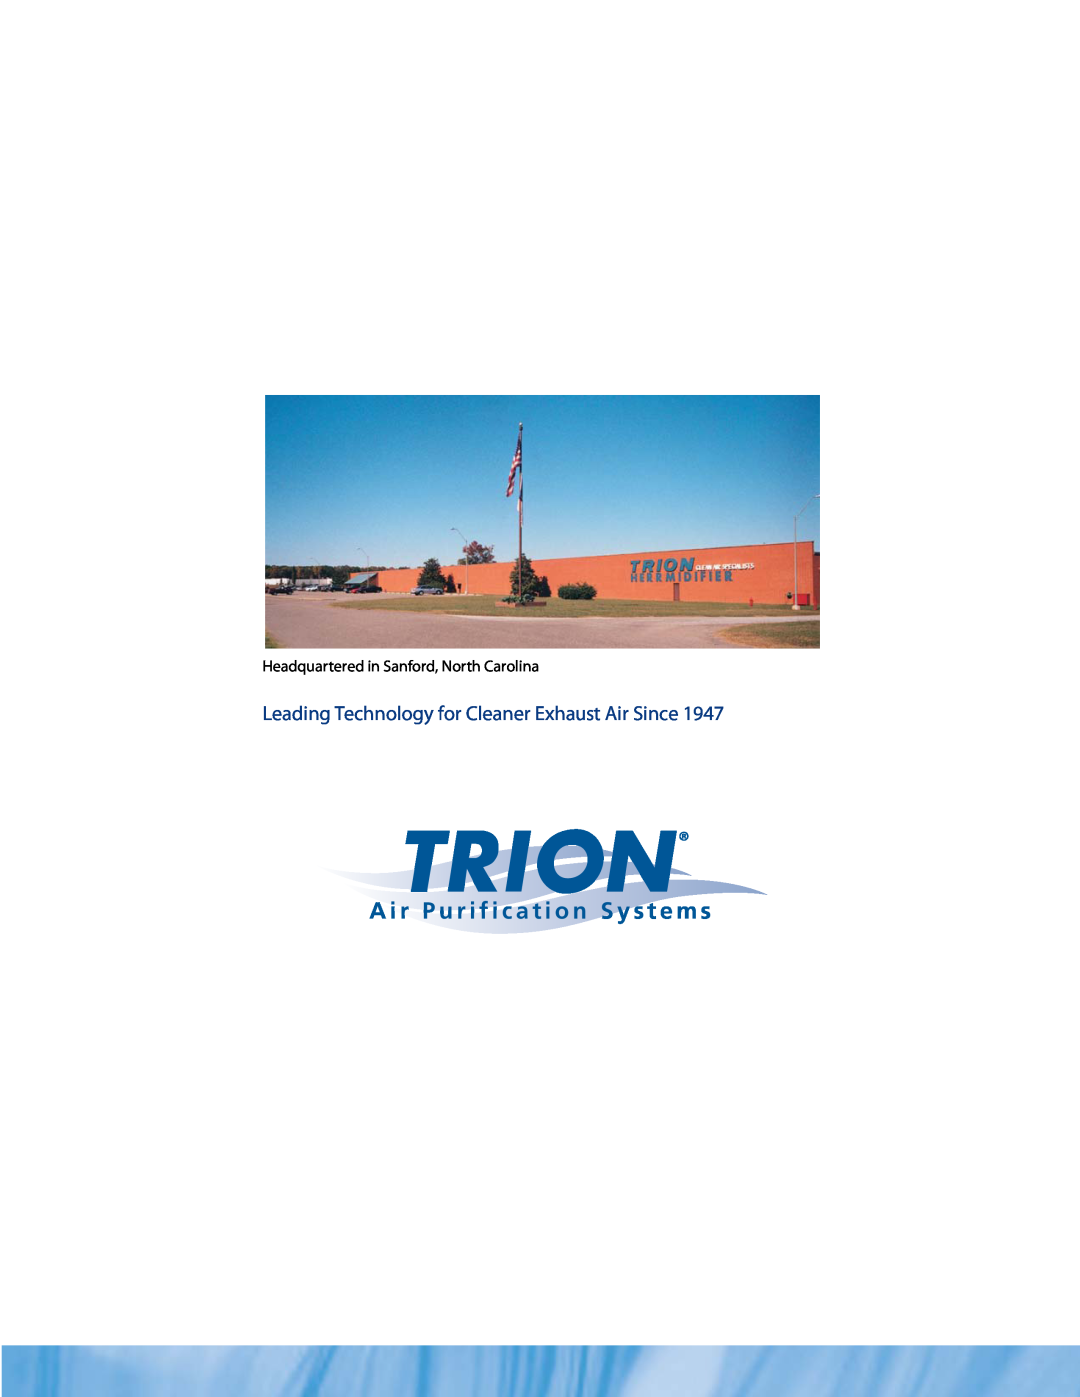 Trion 75 manual A i r P u r i f i c a t i o n S y s t e m s, Leading Technology for Cleaner Exhaust Air Since 